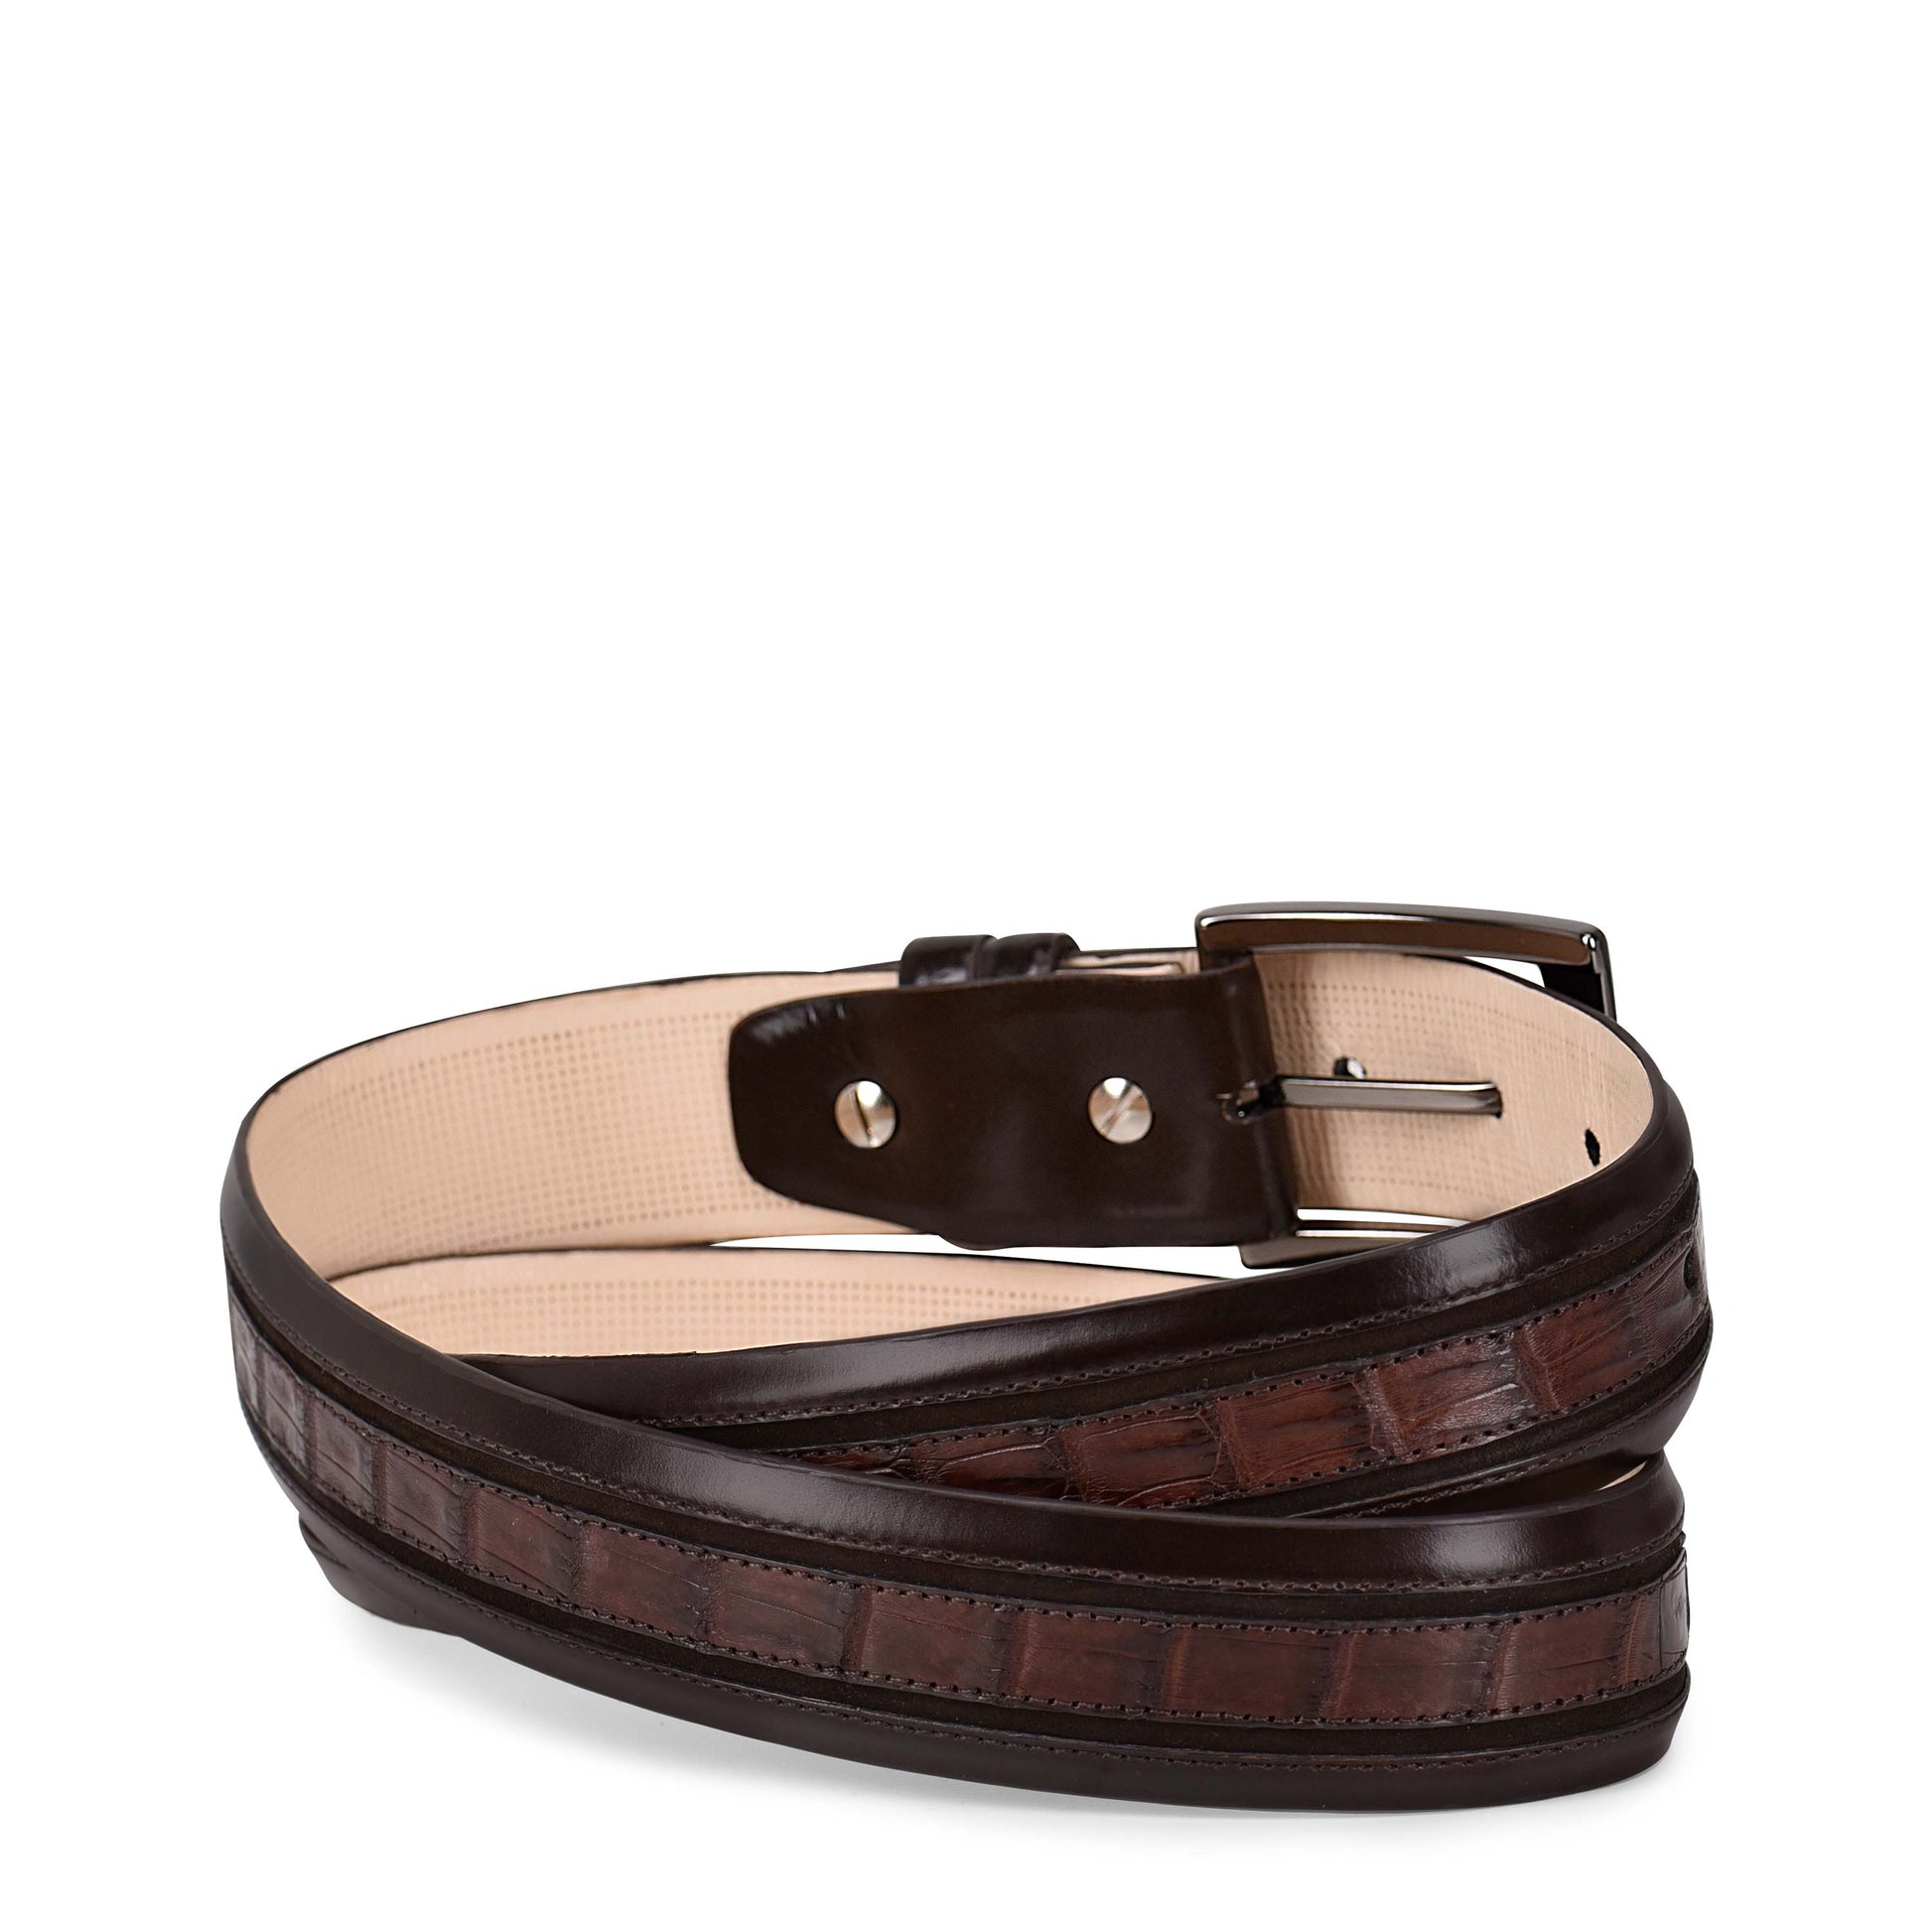 The genuine caiman leather details make the belt stand out and add a touch of luxury